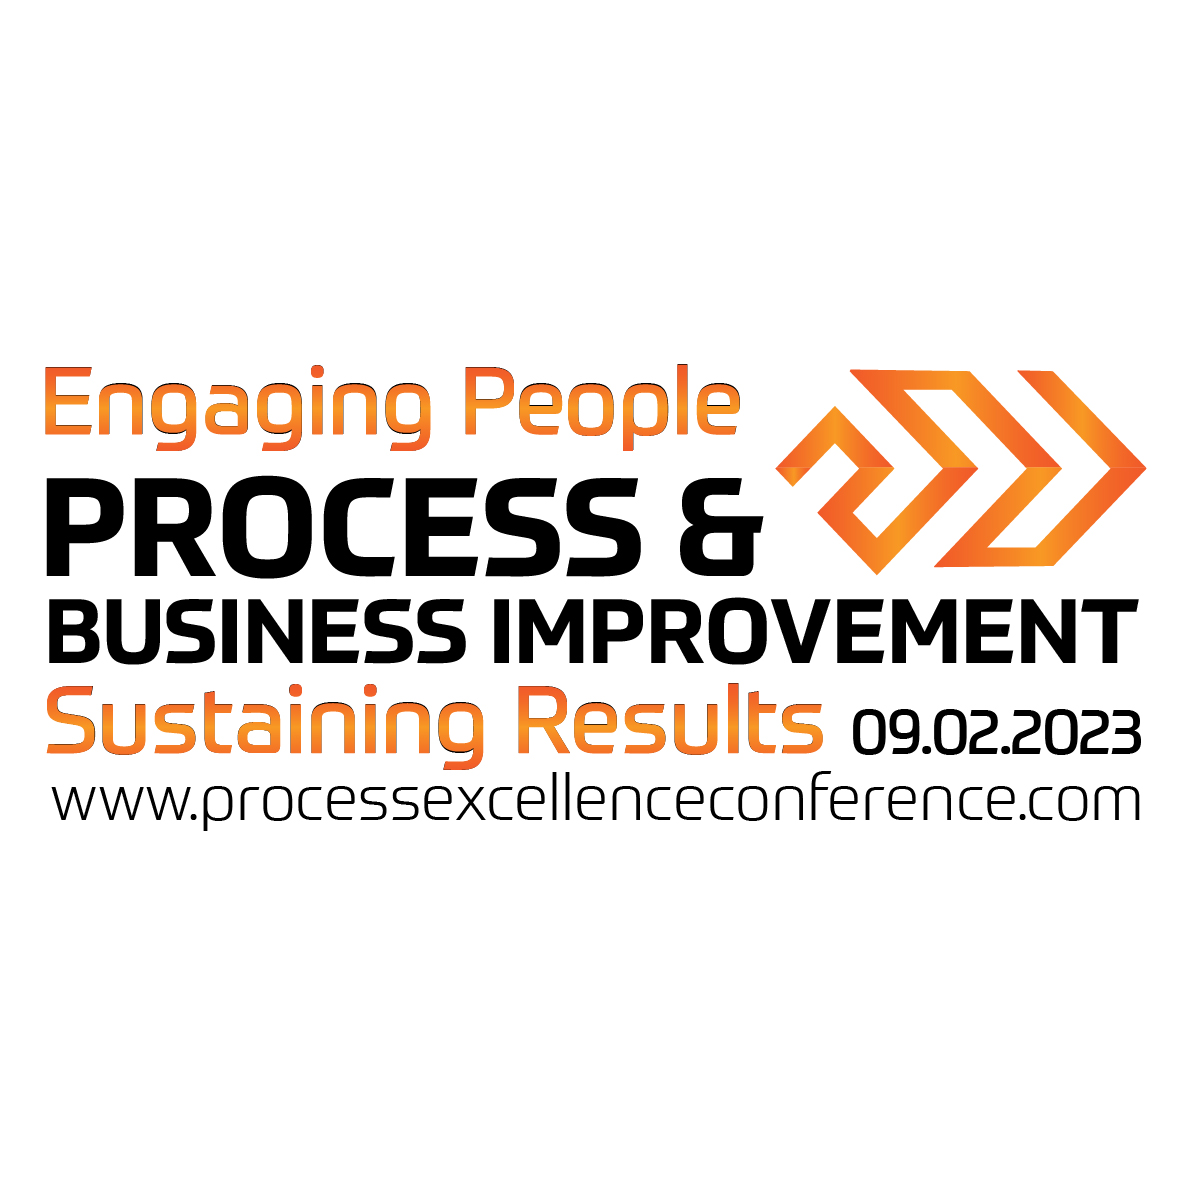 The Process and Business Improvement